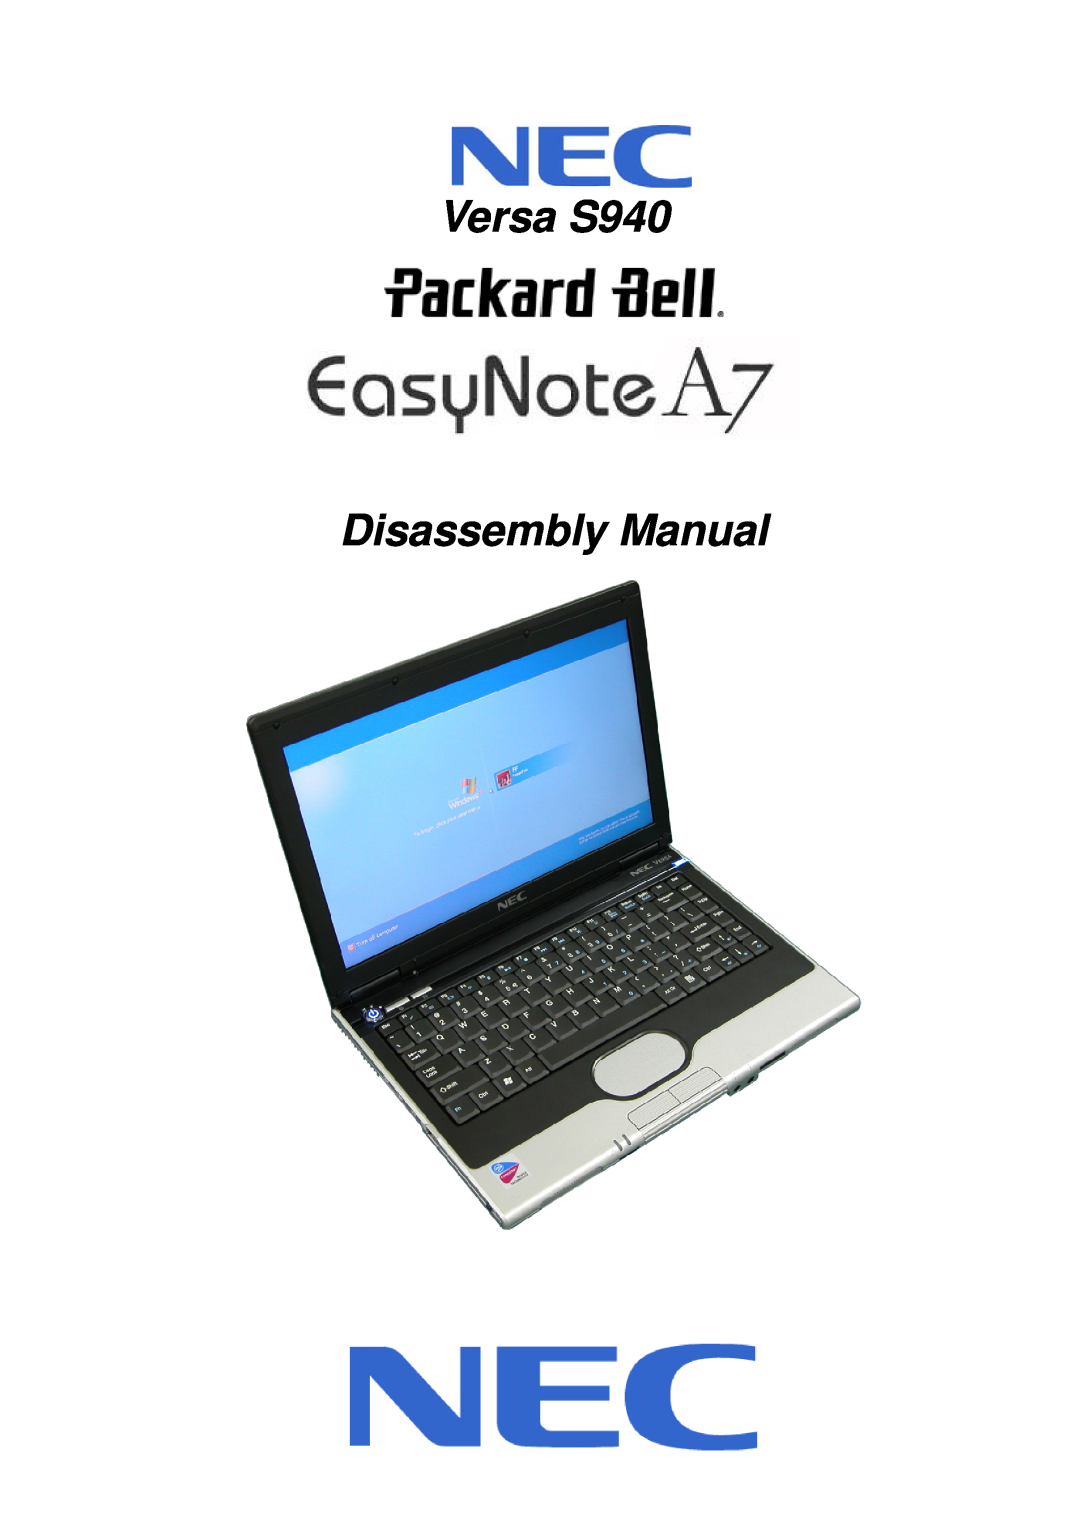 Packard Bell A7 manual Versa S940 Disassembly Manual 